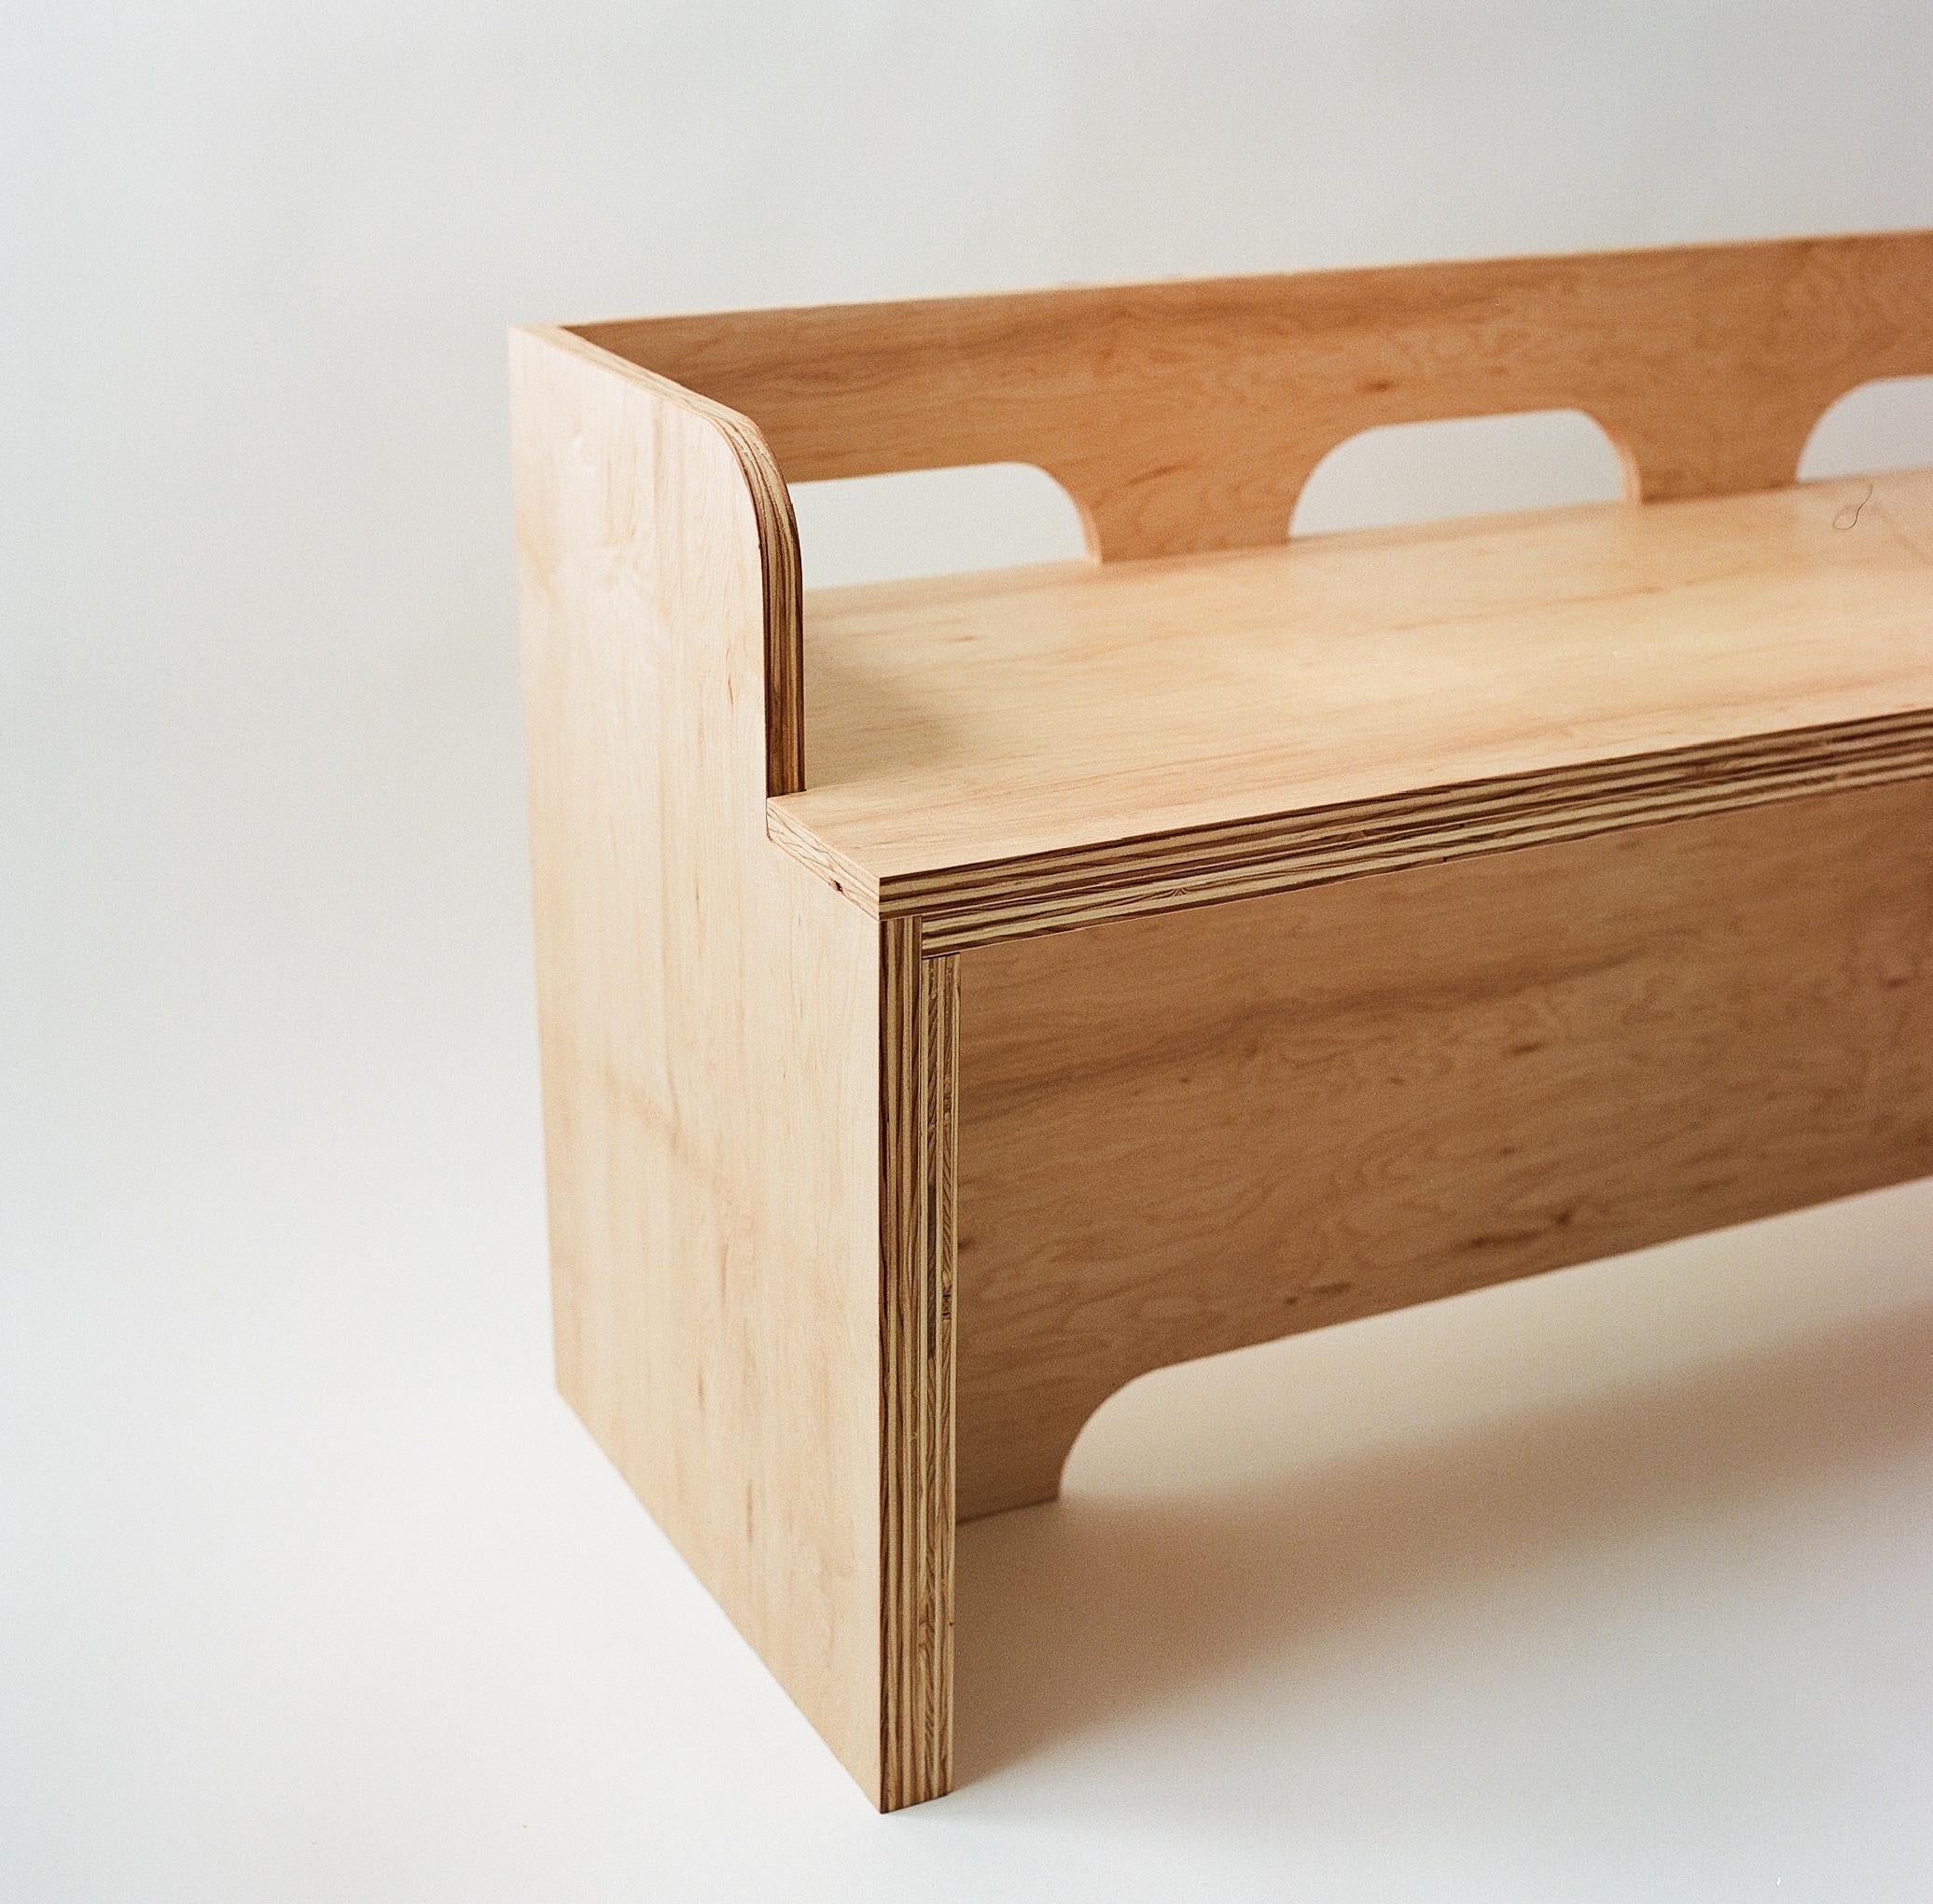 American Lineage Bench in Maple Plywood by Muhly Studio